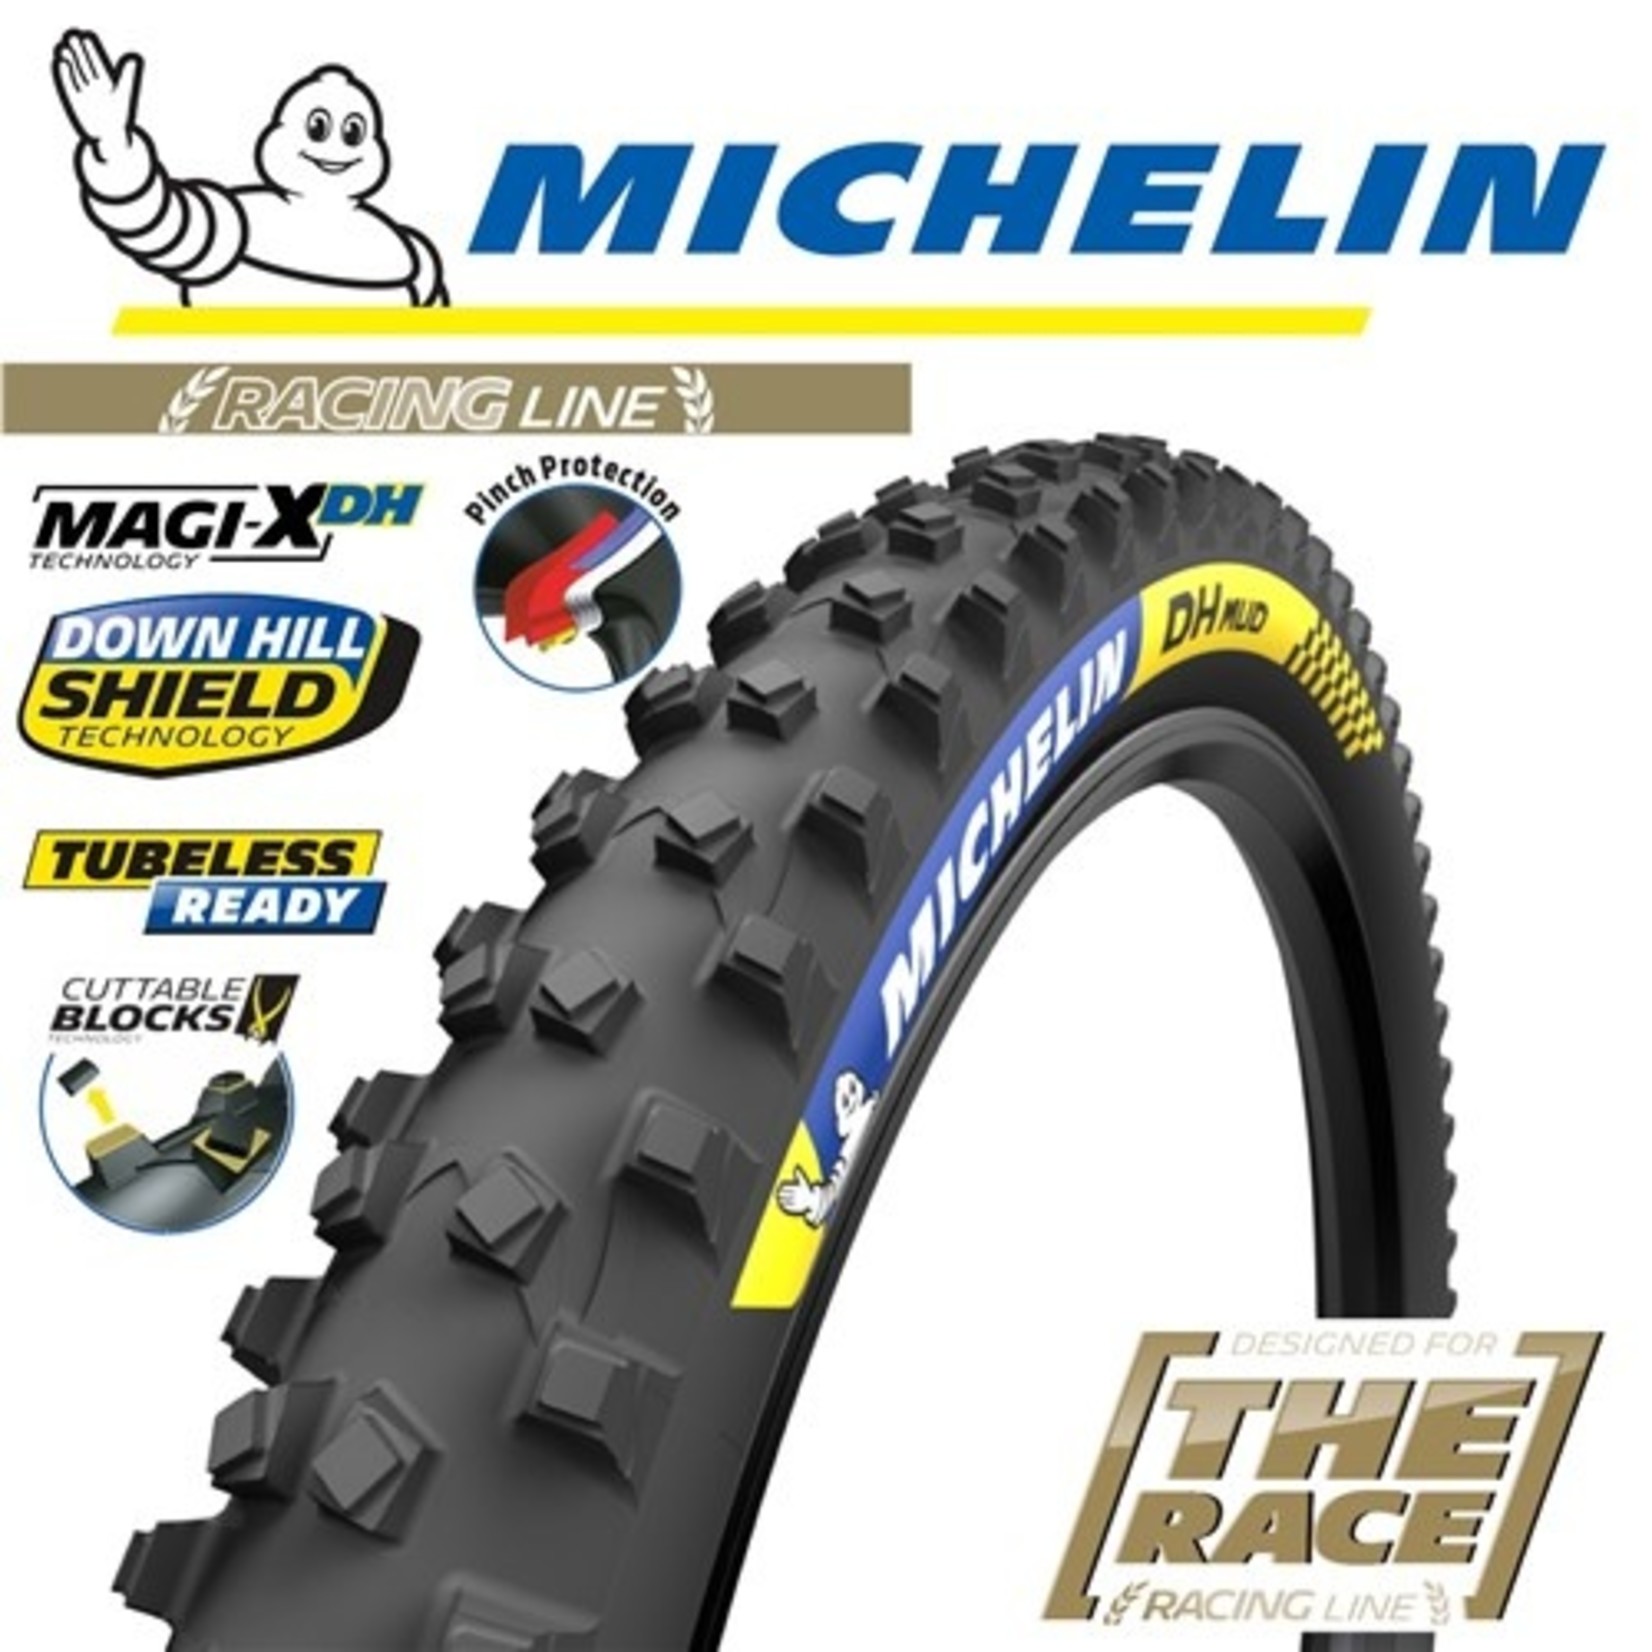 Michelin Michelin Downhill Bike Tyre - DH Mud - 27.5" X 2.4" - Wire Bead Bicycle Tyre